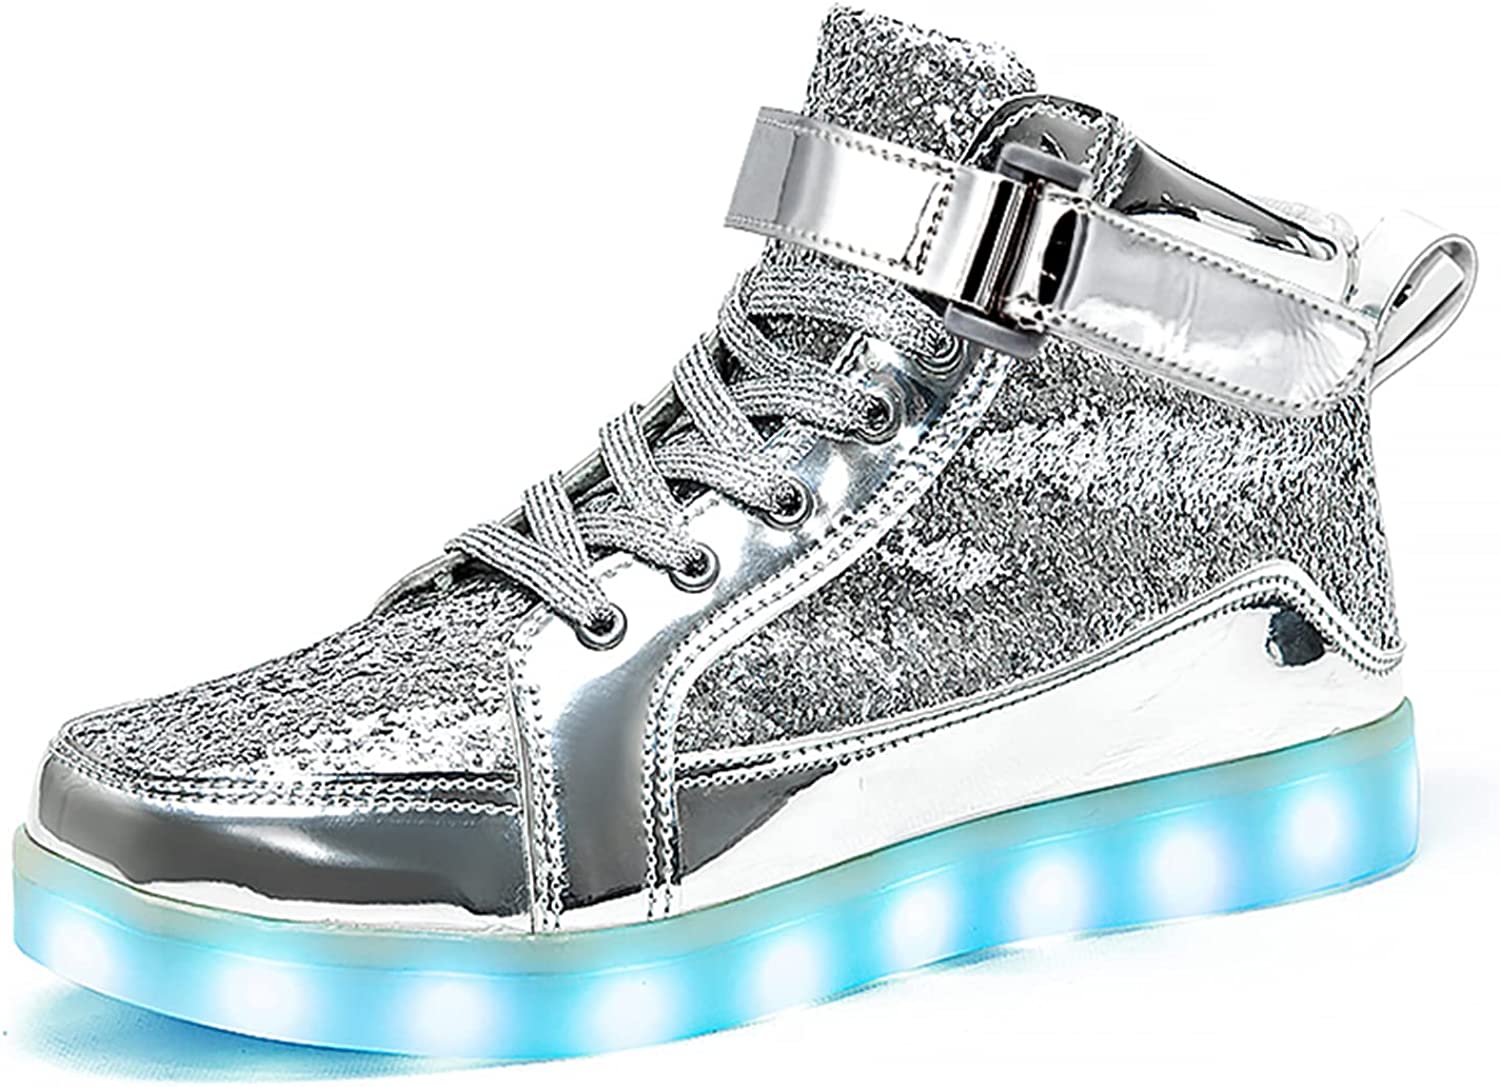 IGxx LED Light Up Shoes for Kids High Top Sneakers Lights Shoes 